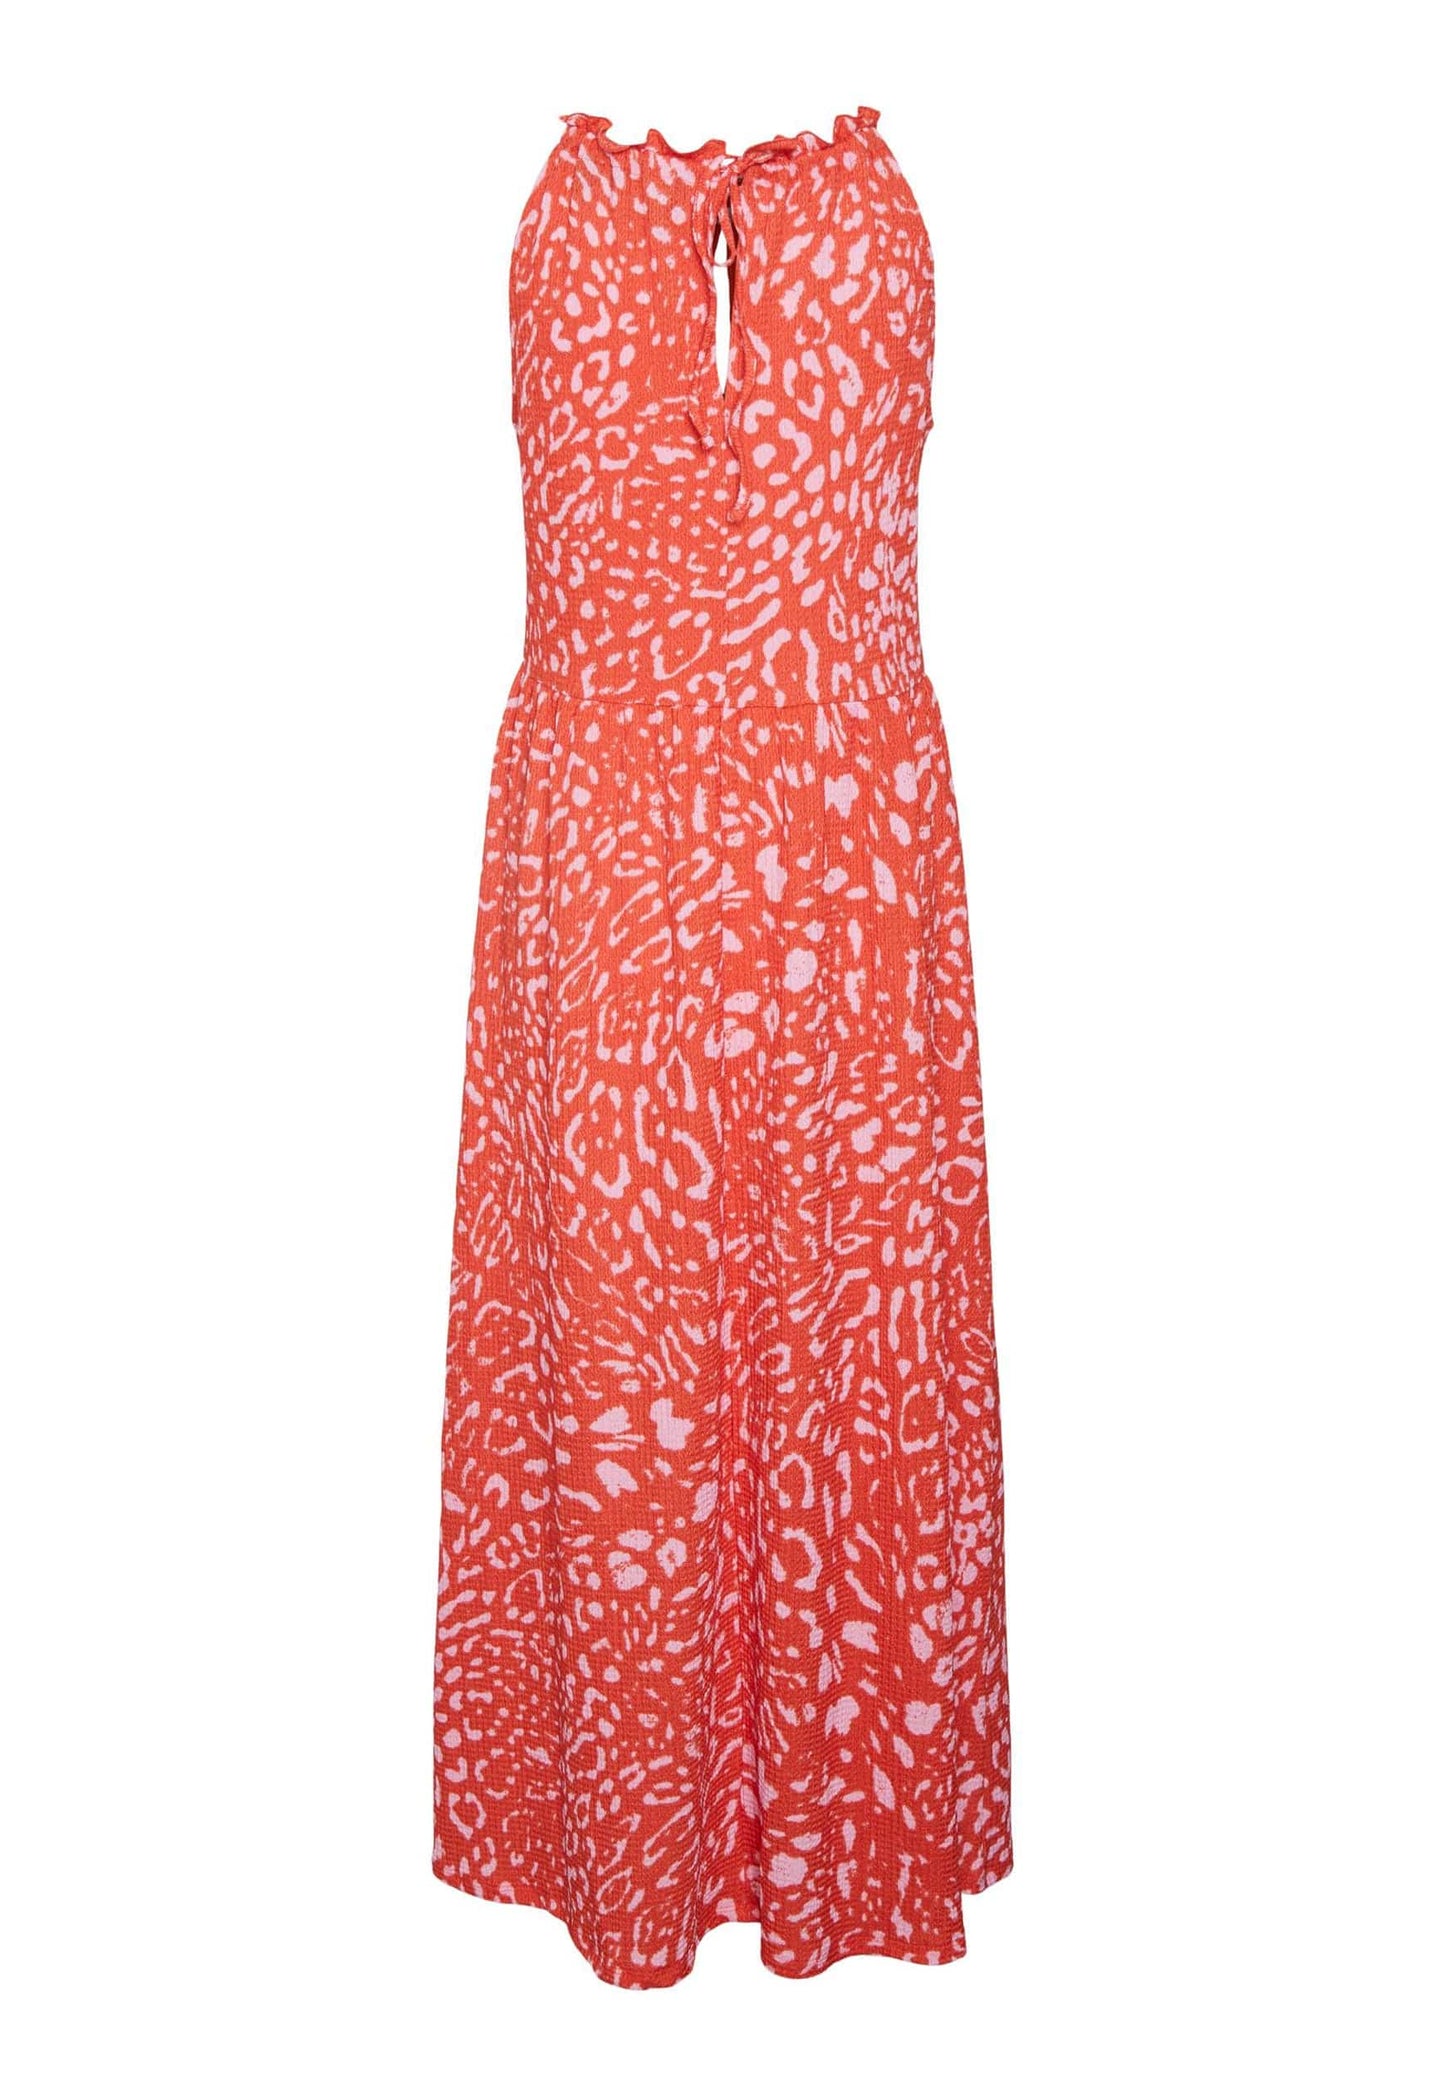 
                  
                    VERO MODA Loa Leopard Print Halter Neck Beachy Maxi Dress in Red & Pink - One Nation Clothing
                  
                